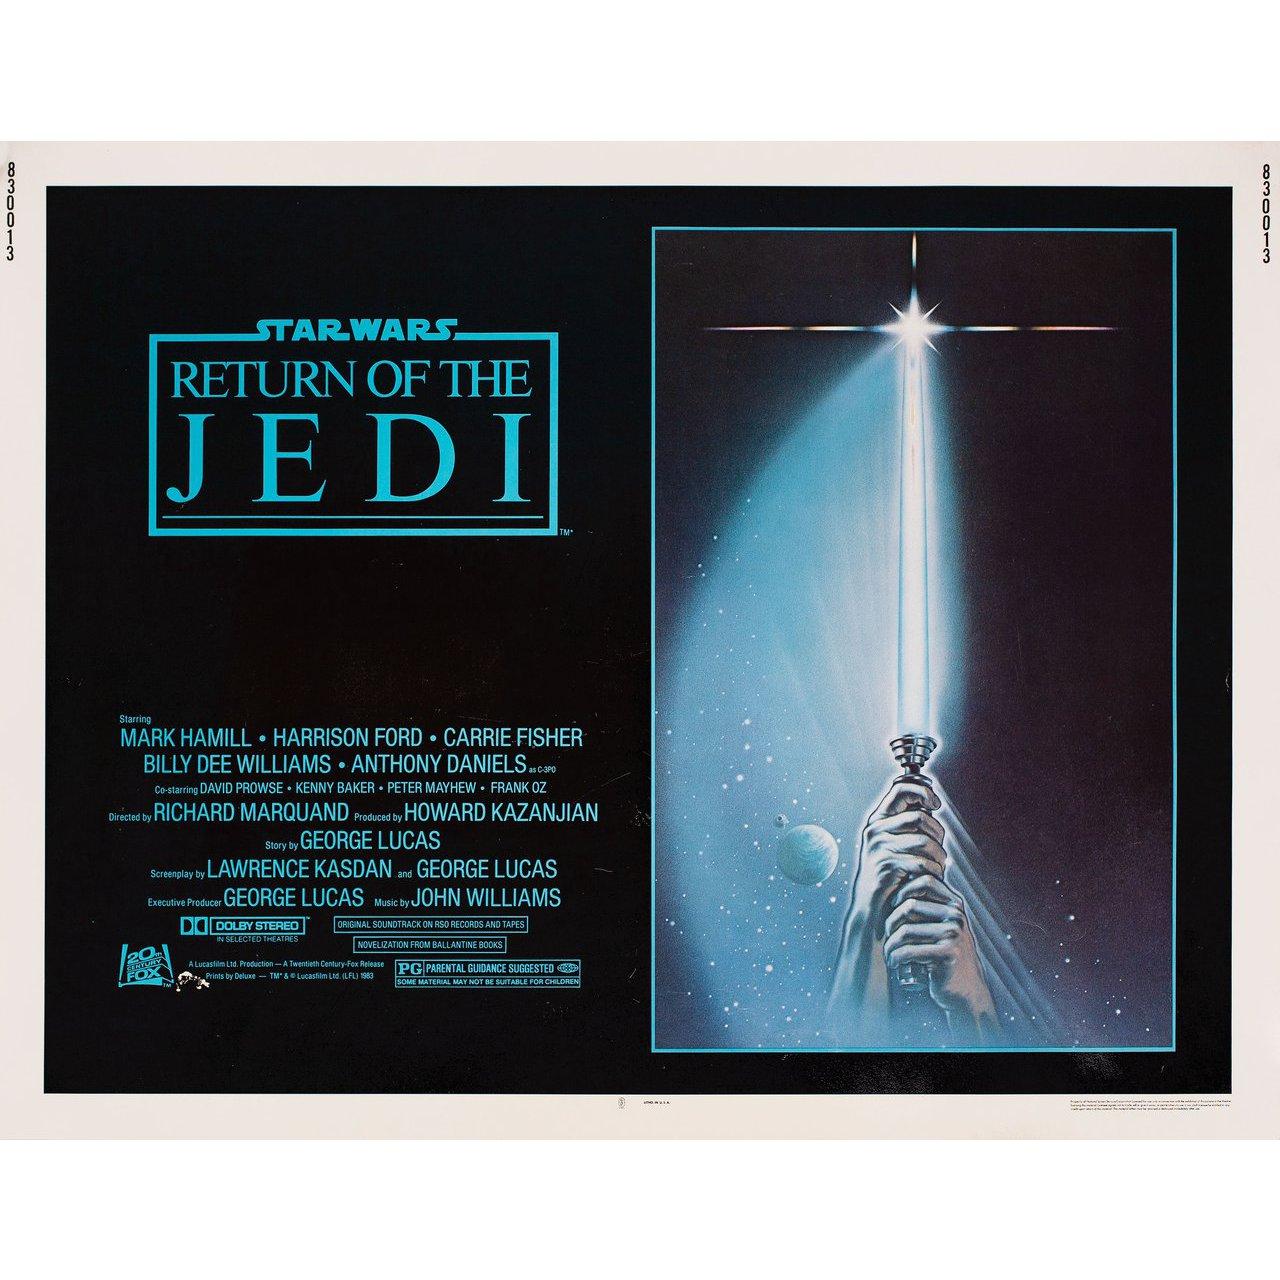 Original 1983 U.S. half sheet poster for the film Return of the Jedi (Star Wars: Episode VI) directed by Richard Marquand with Mark Hamill / Harrison Ford / Carrie Fisher / Billy Dee Williams. Very Good-Fine condition, rolled. Please note: the size